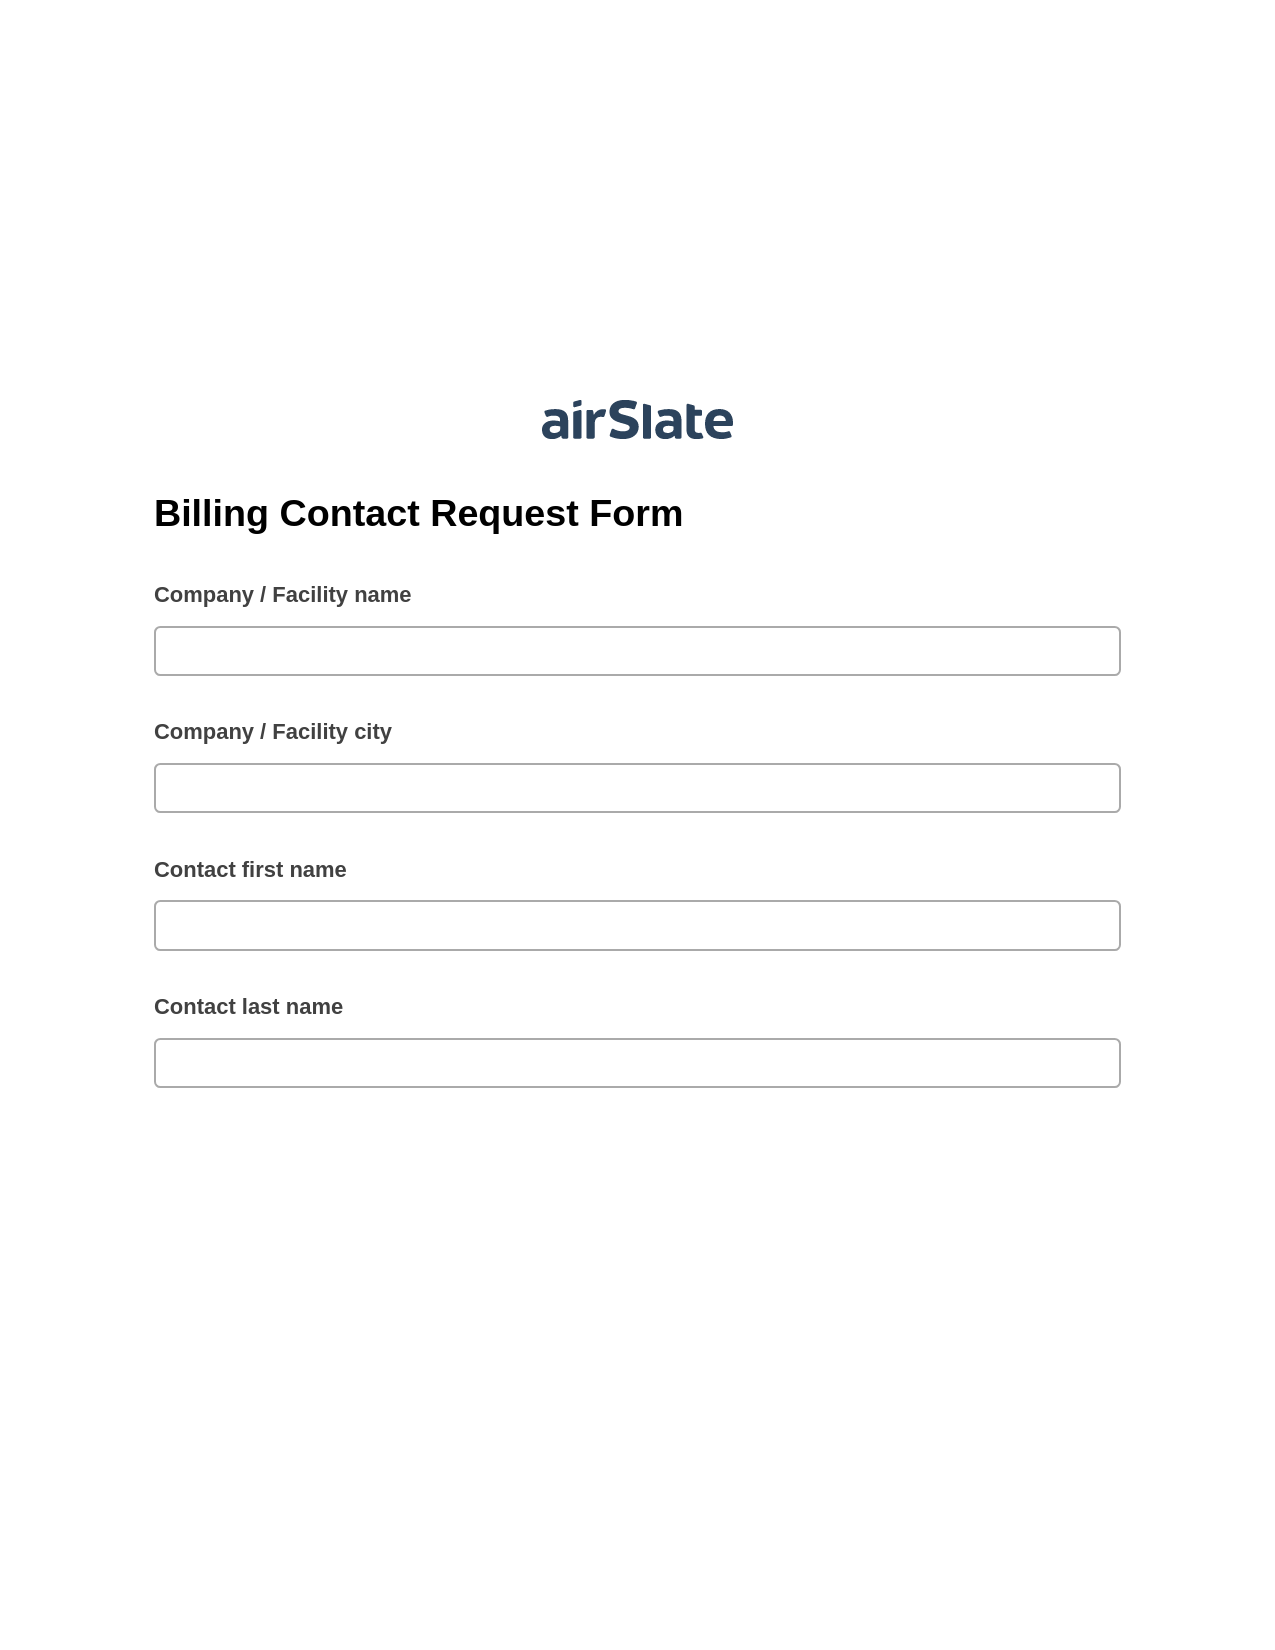 Billing Contact Request Form Pre-fill Document Bot, Audit Trail Bot, Email Notification Postfinish Bot